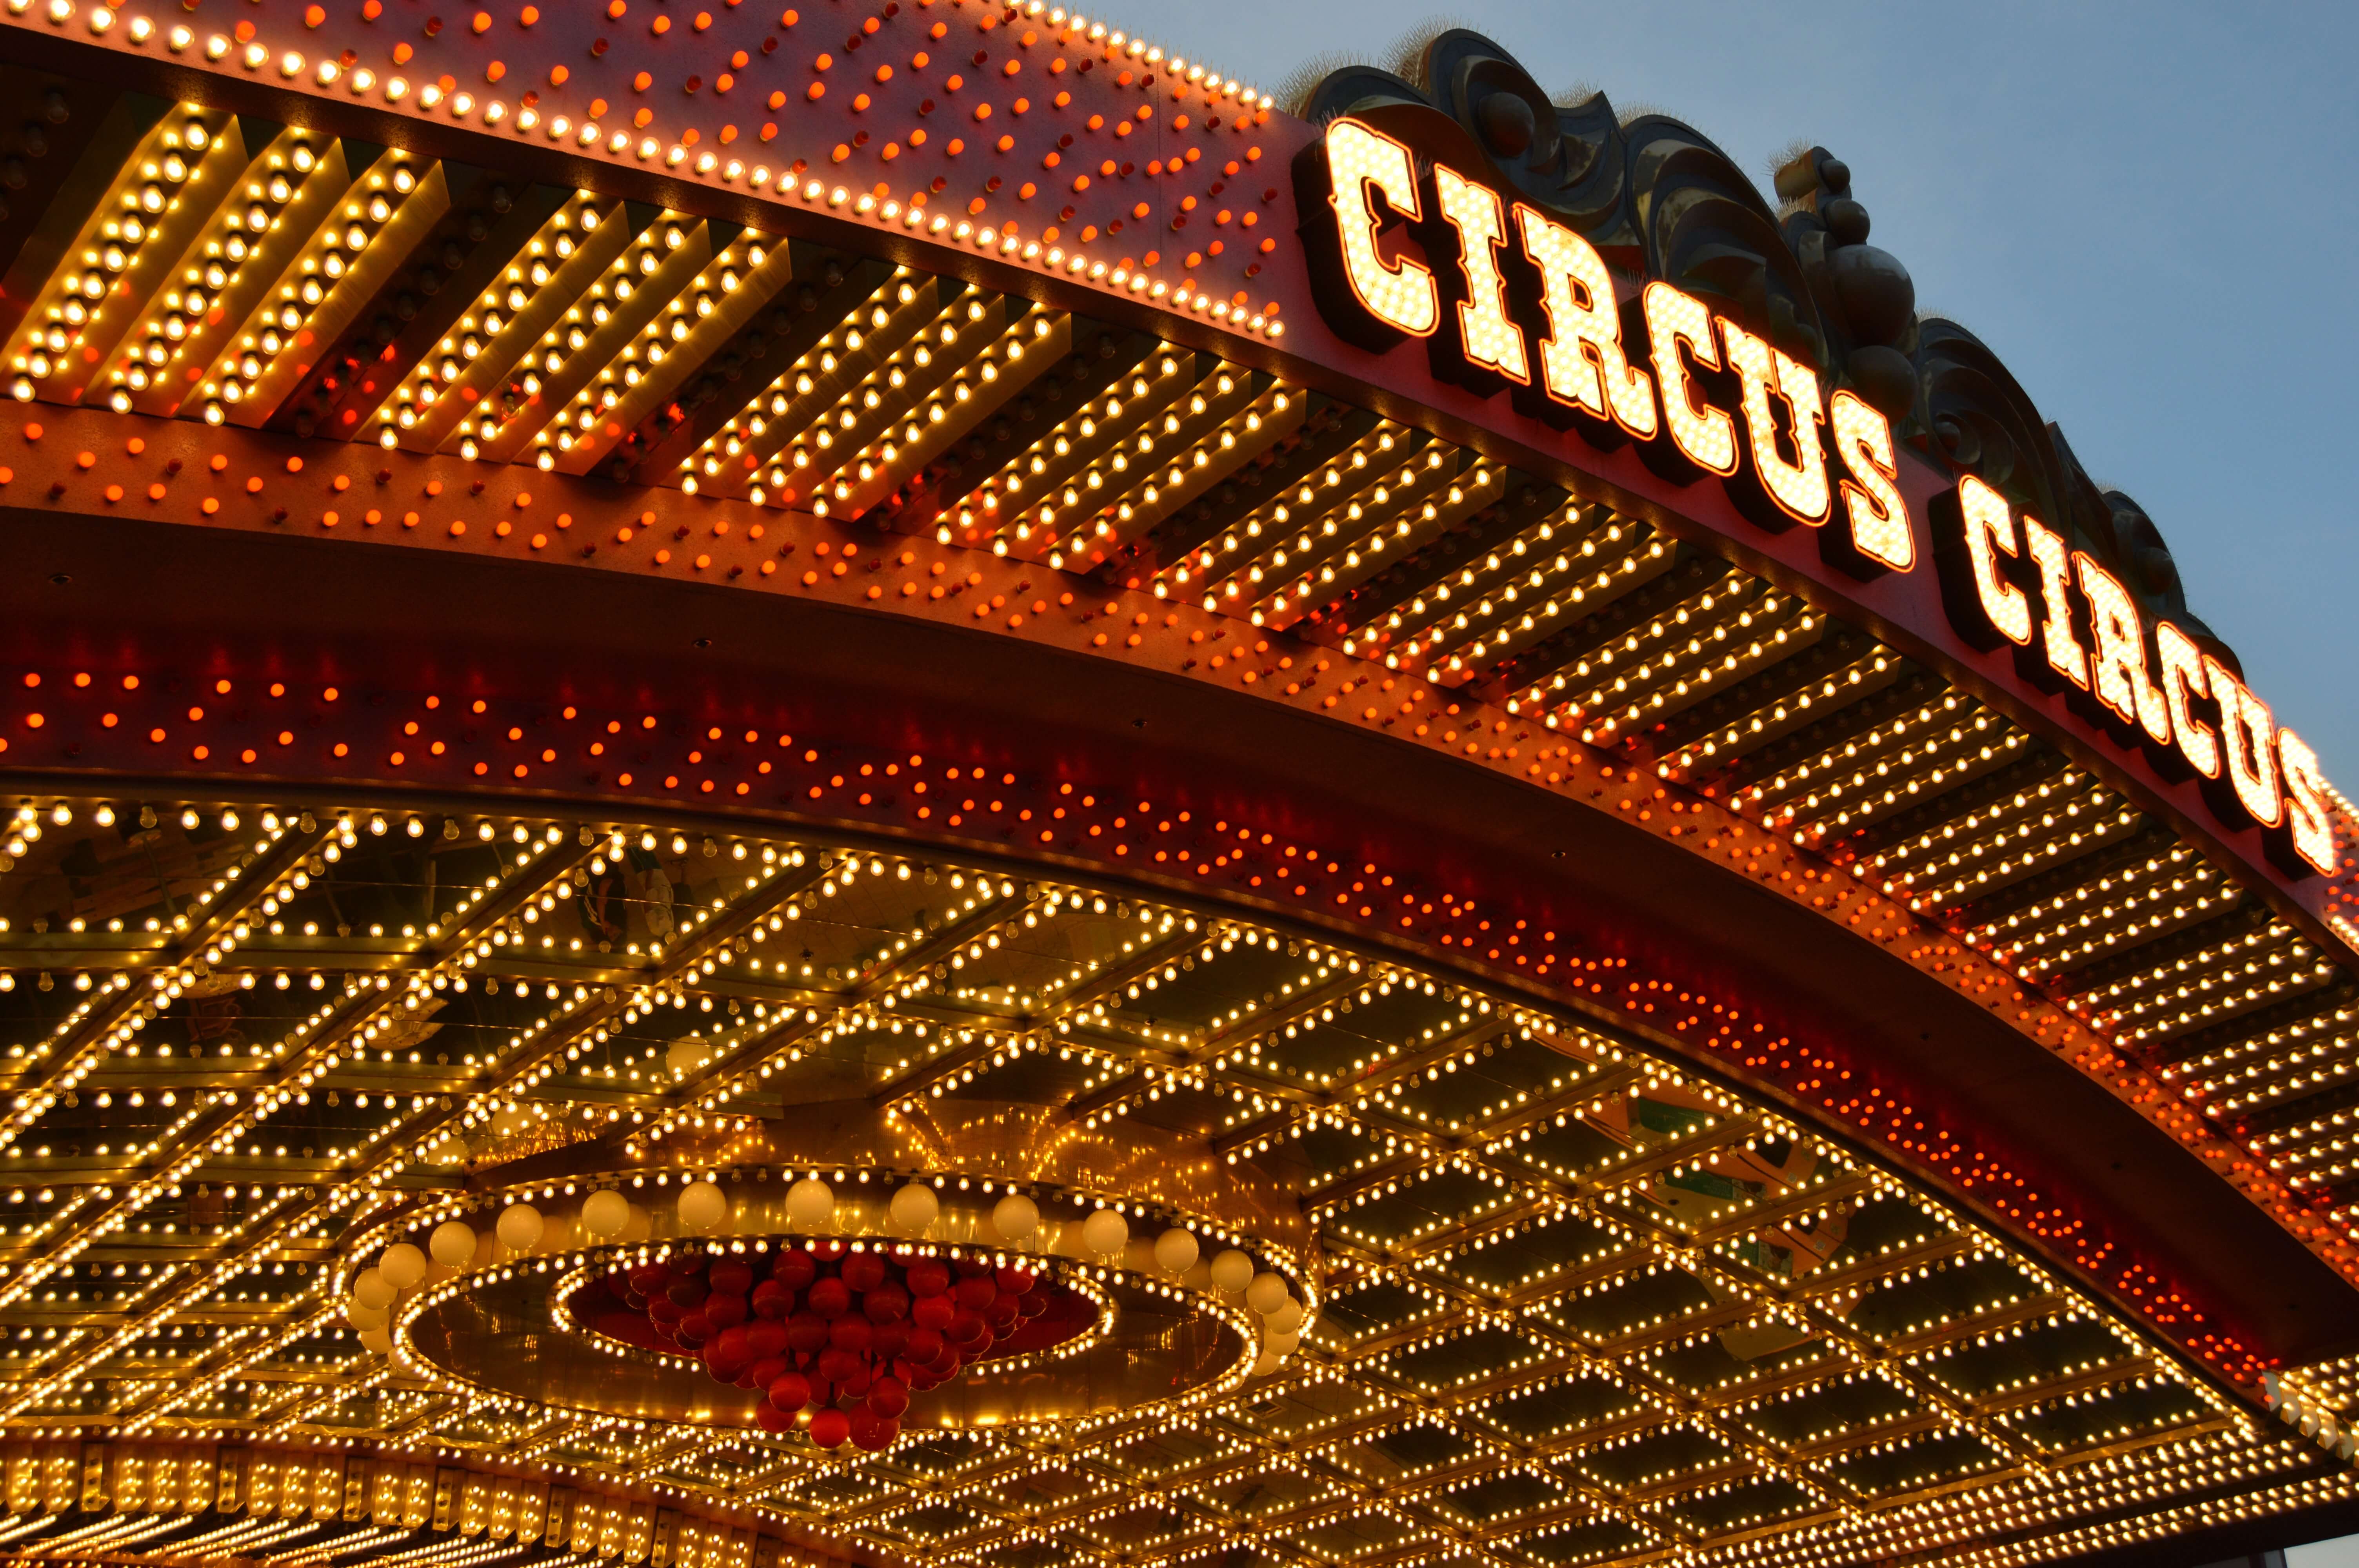 A photo of Circus Circus hotel which is a budget accommodation option